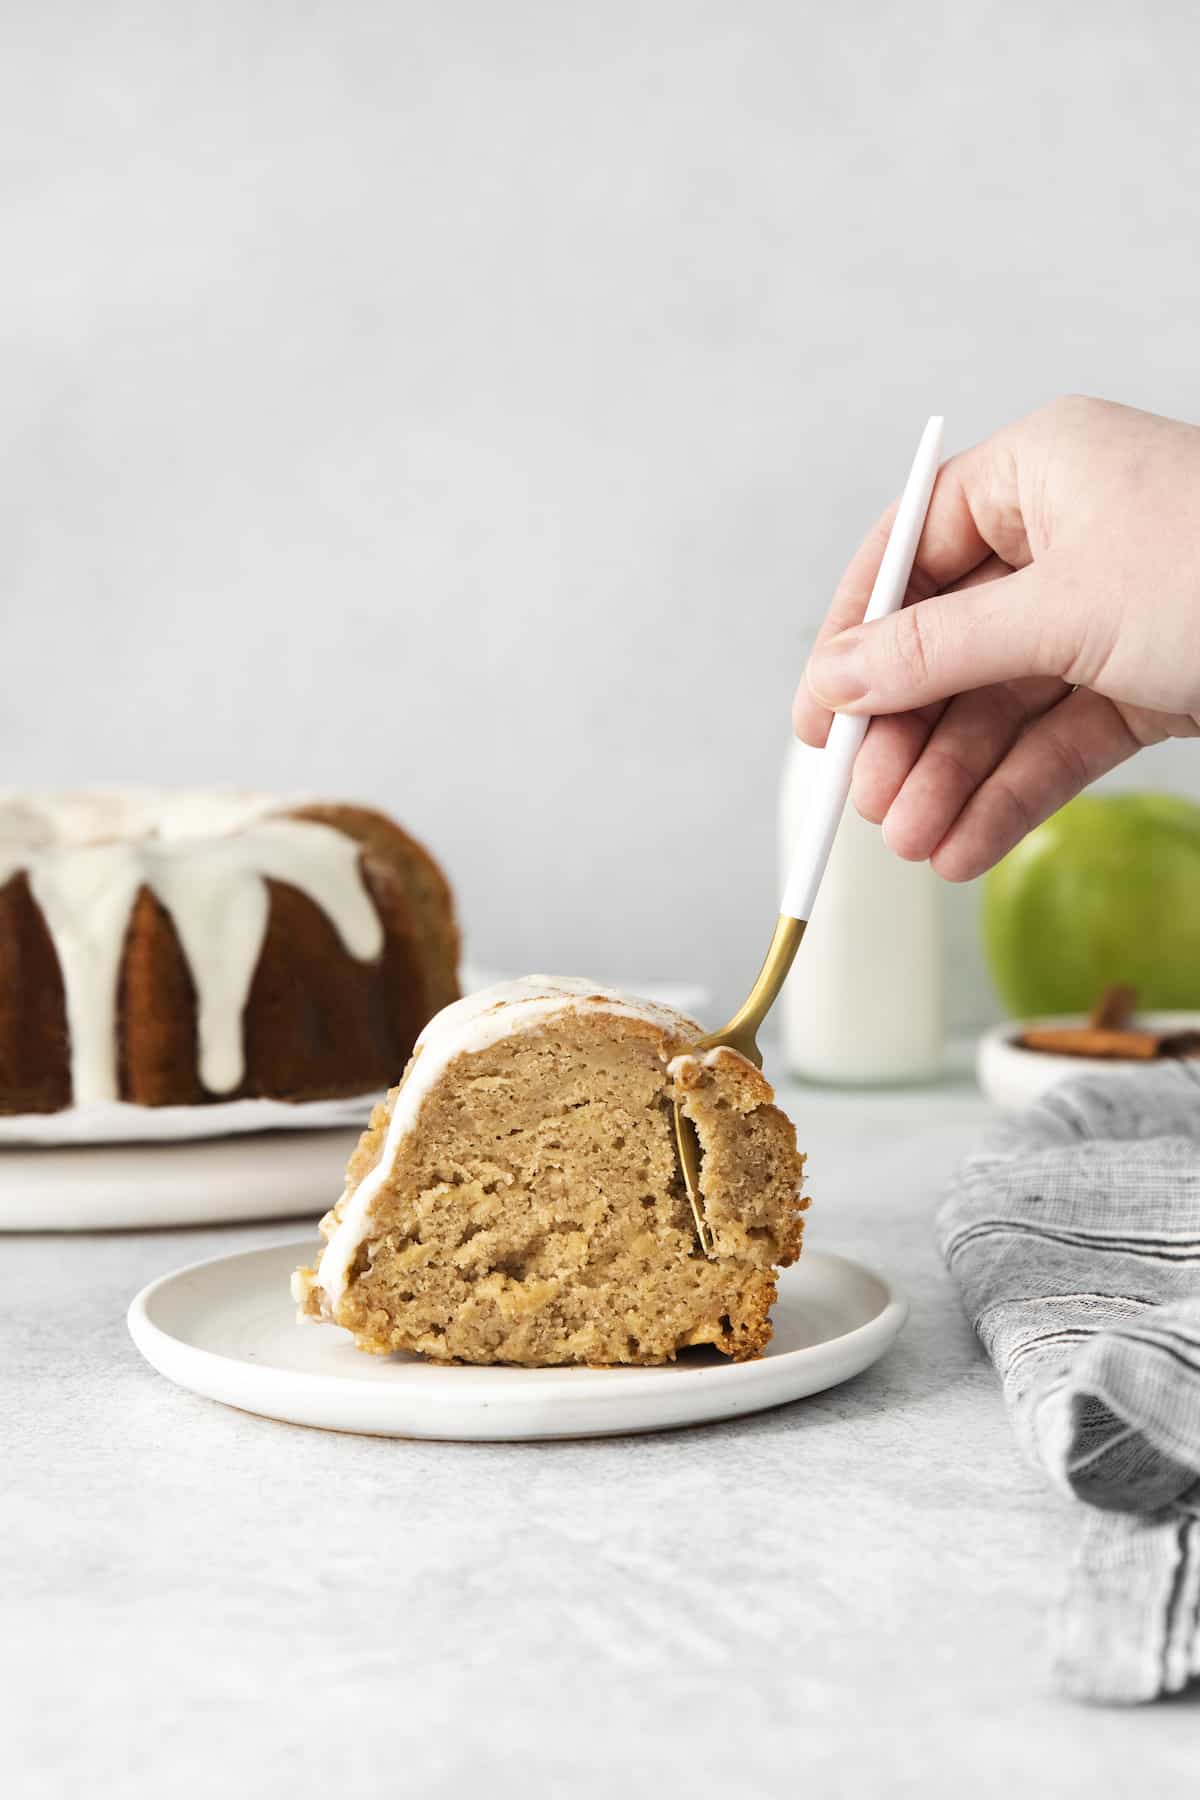 Hand with a fork, taking a bite out of a slice of apple cake